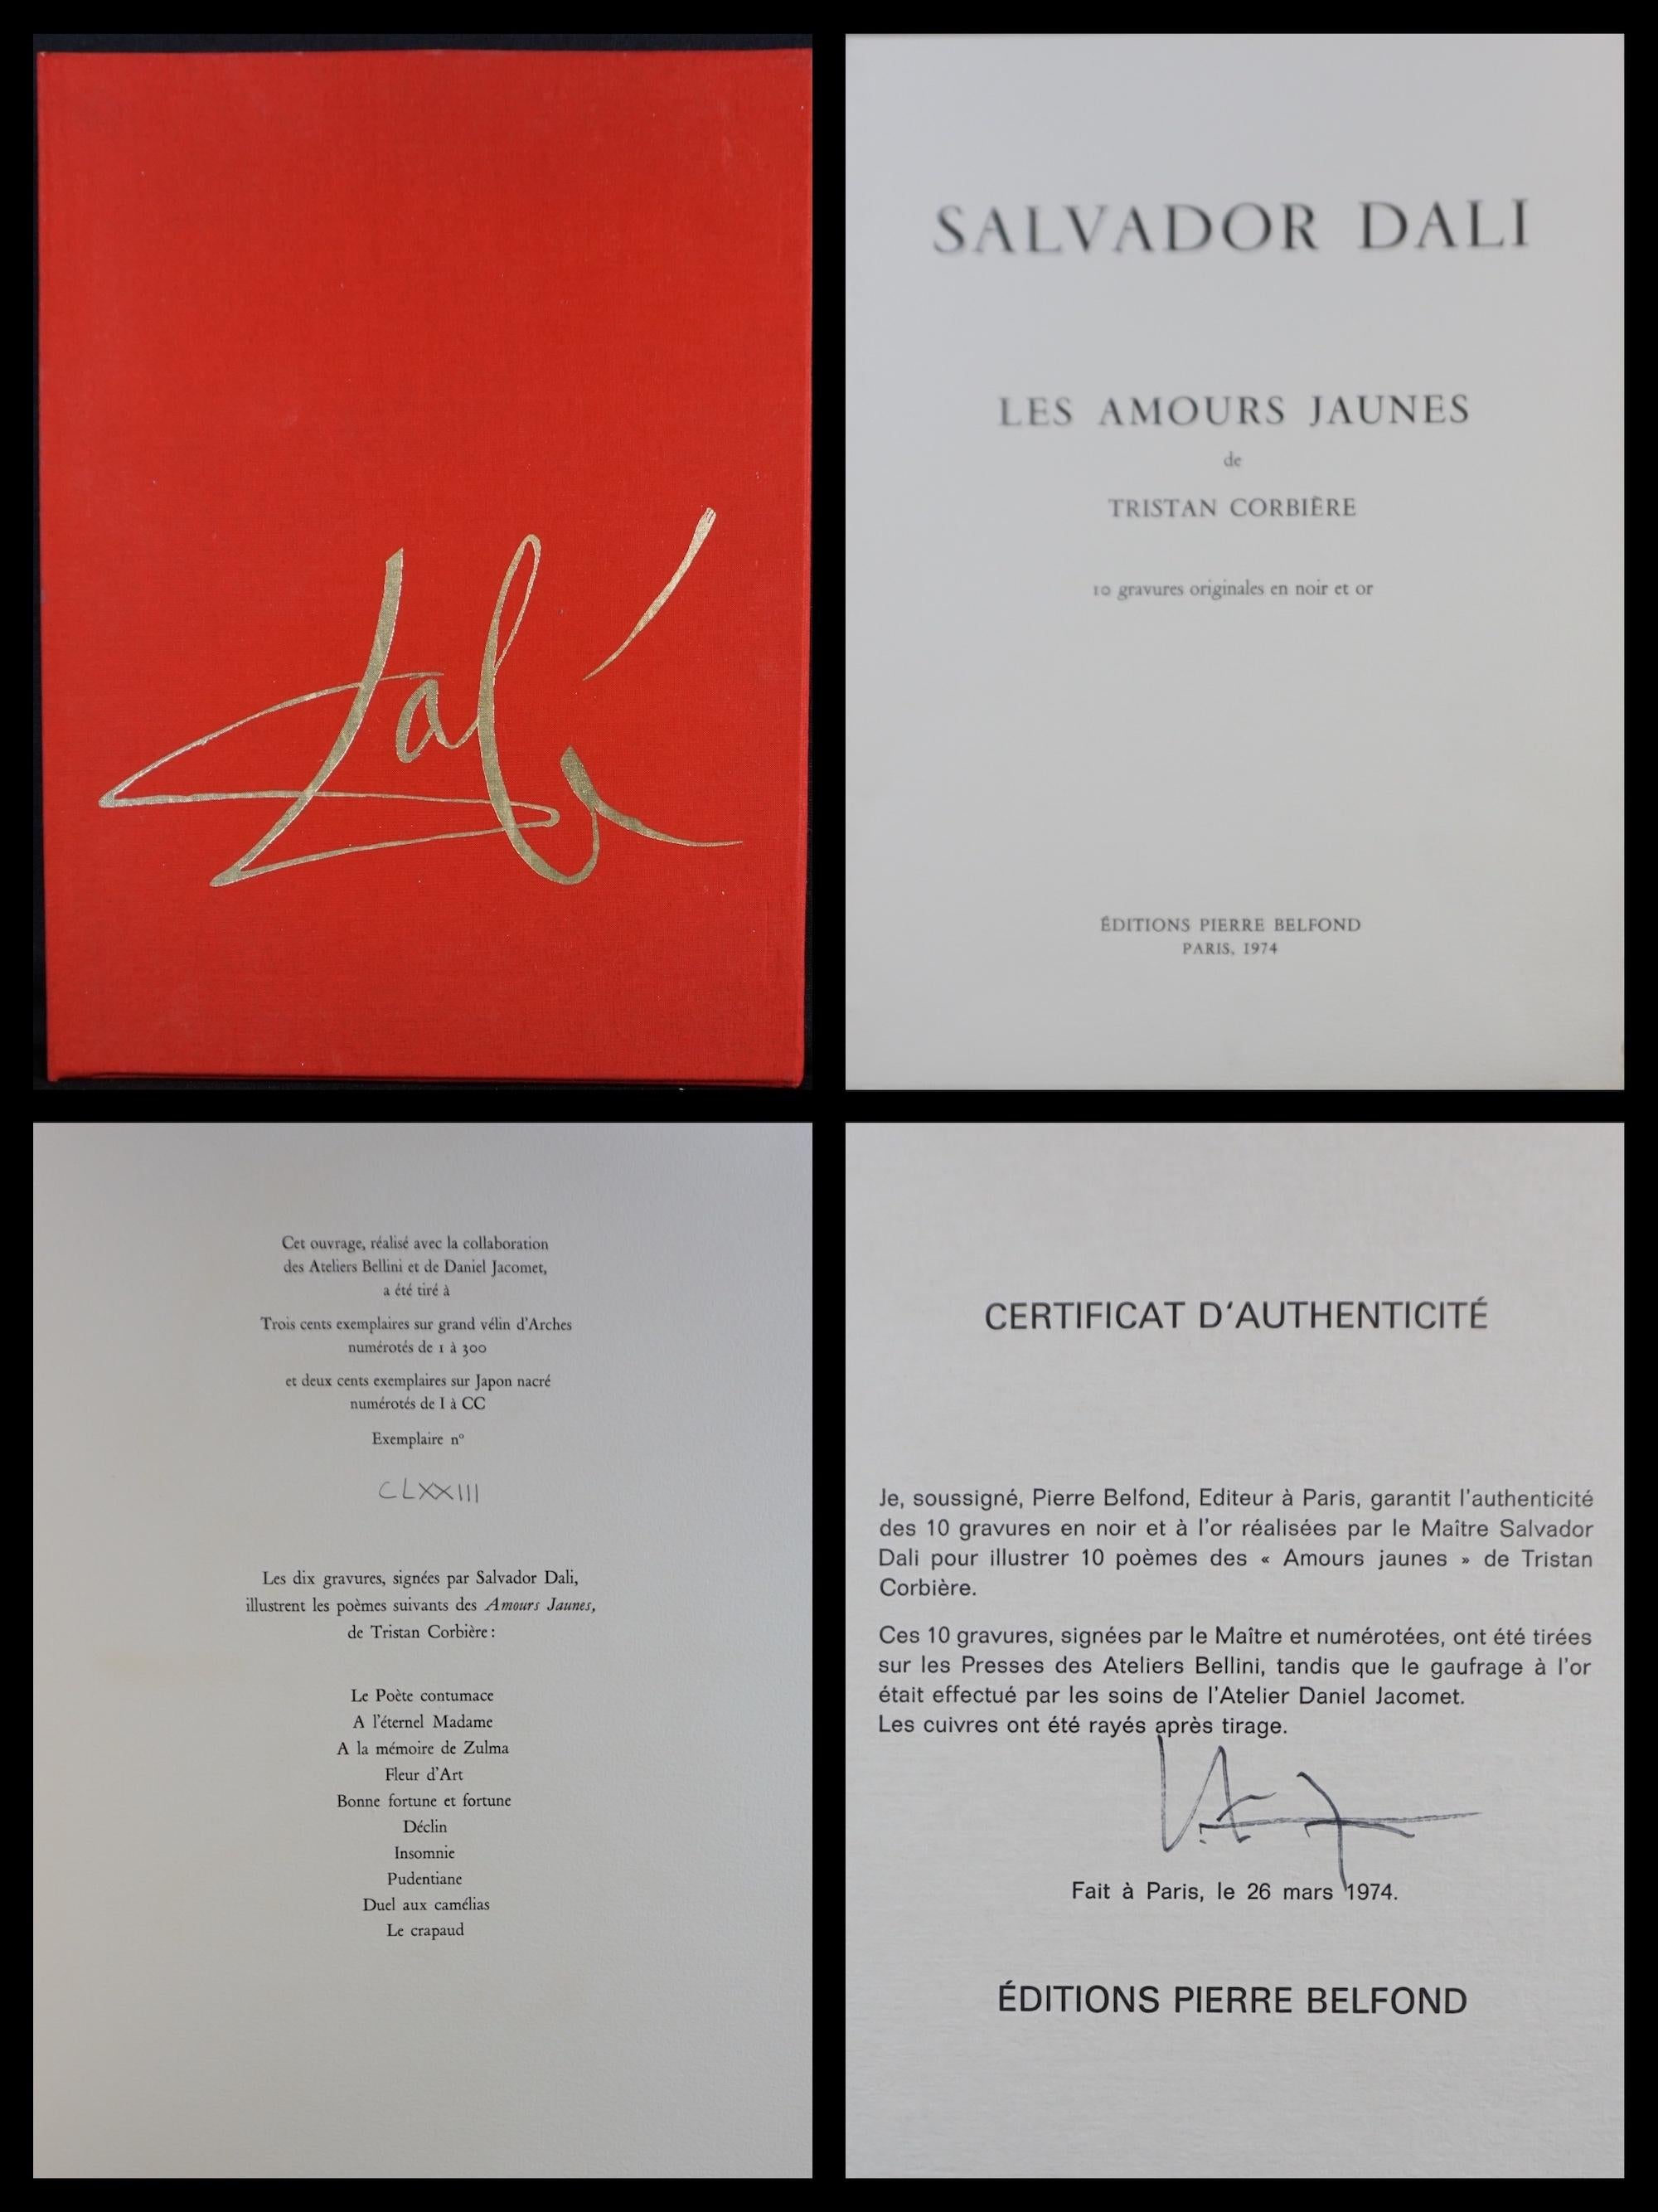 ARTIST: Salvador Dali

TITLE: Les Amours Jaunes Suite

 MEDIUM: 10 Etchings & color and gold flakes with original portfolio cover

SIGNED: Each piece is Hand Signed 
 

EDITION NUMBER: CLXXXIII/CC matched numbered

MEASUREMENTS: 15.5